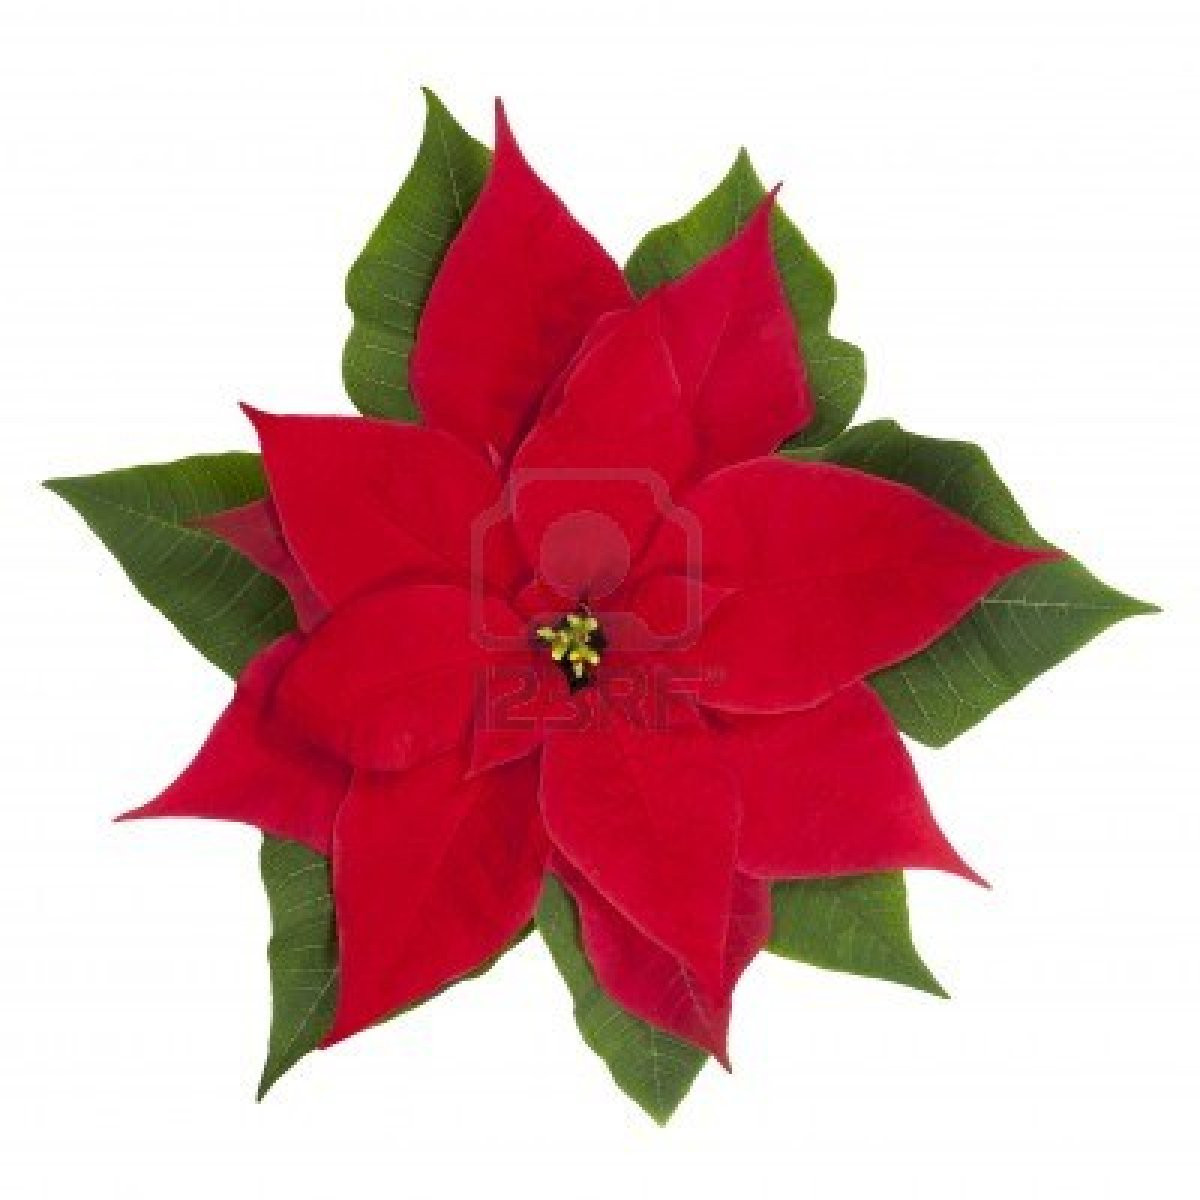 Poinsettia Christmas Flower
 Behind the Scenes Camp Christmas